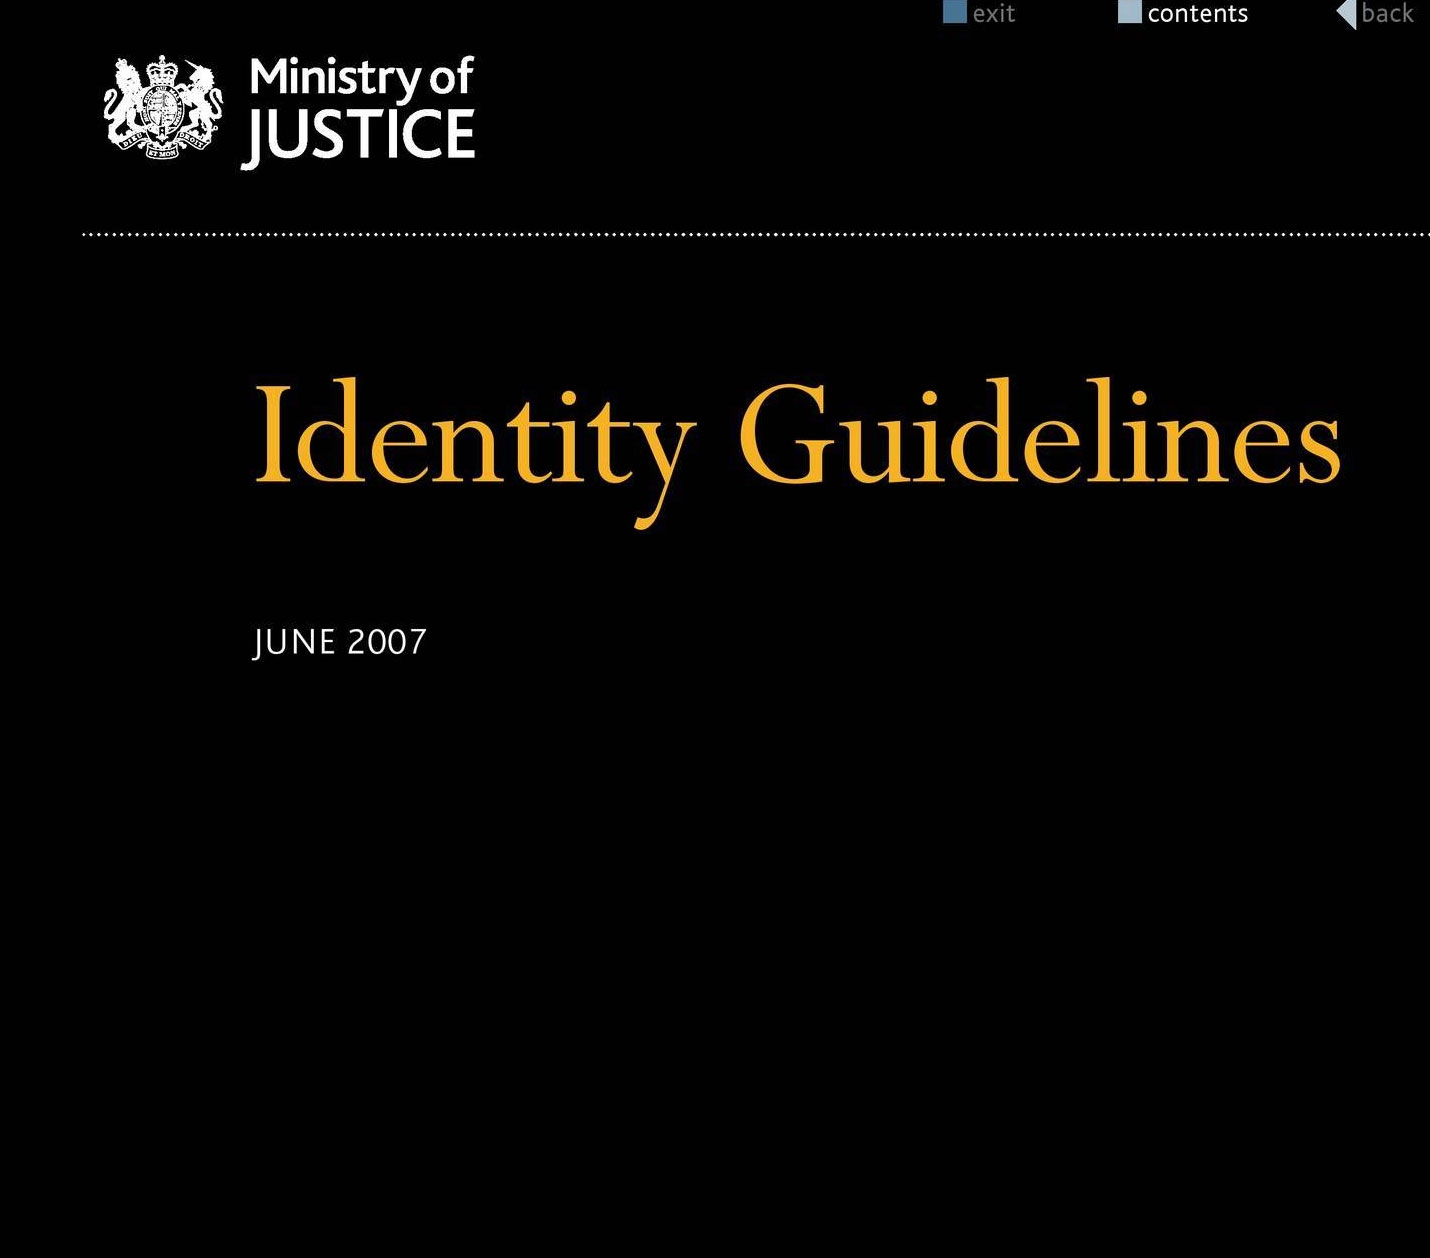 Ministry of Justice Identity Guidelines